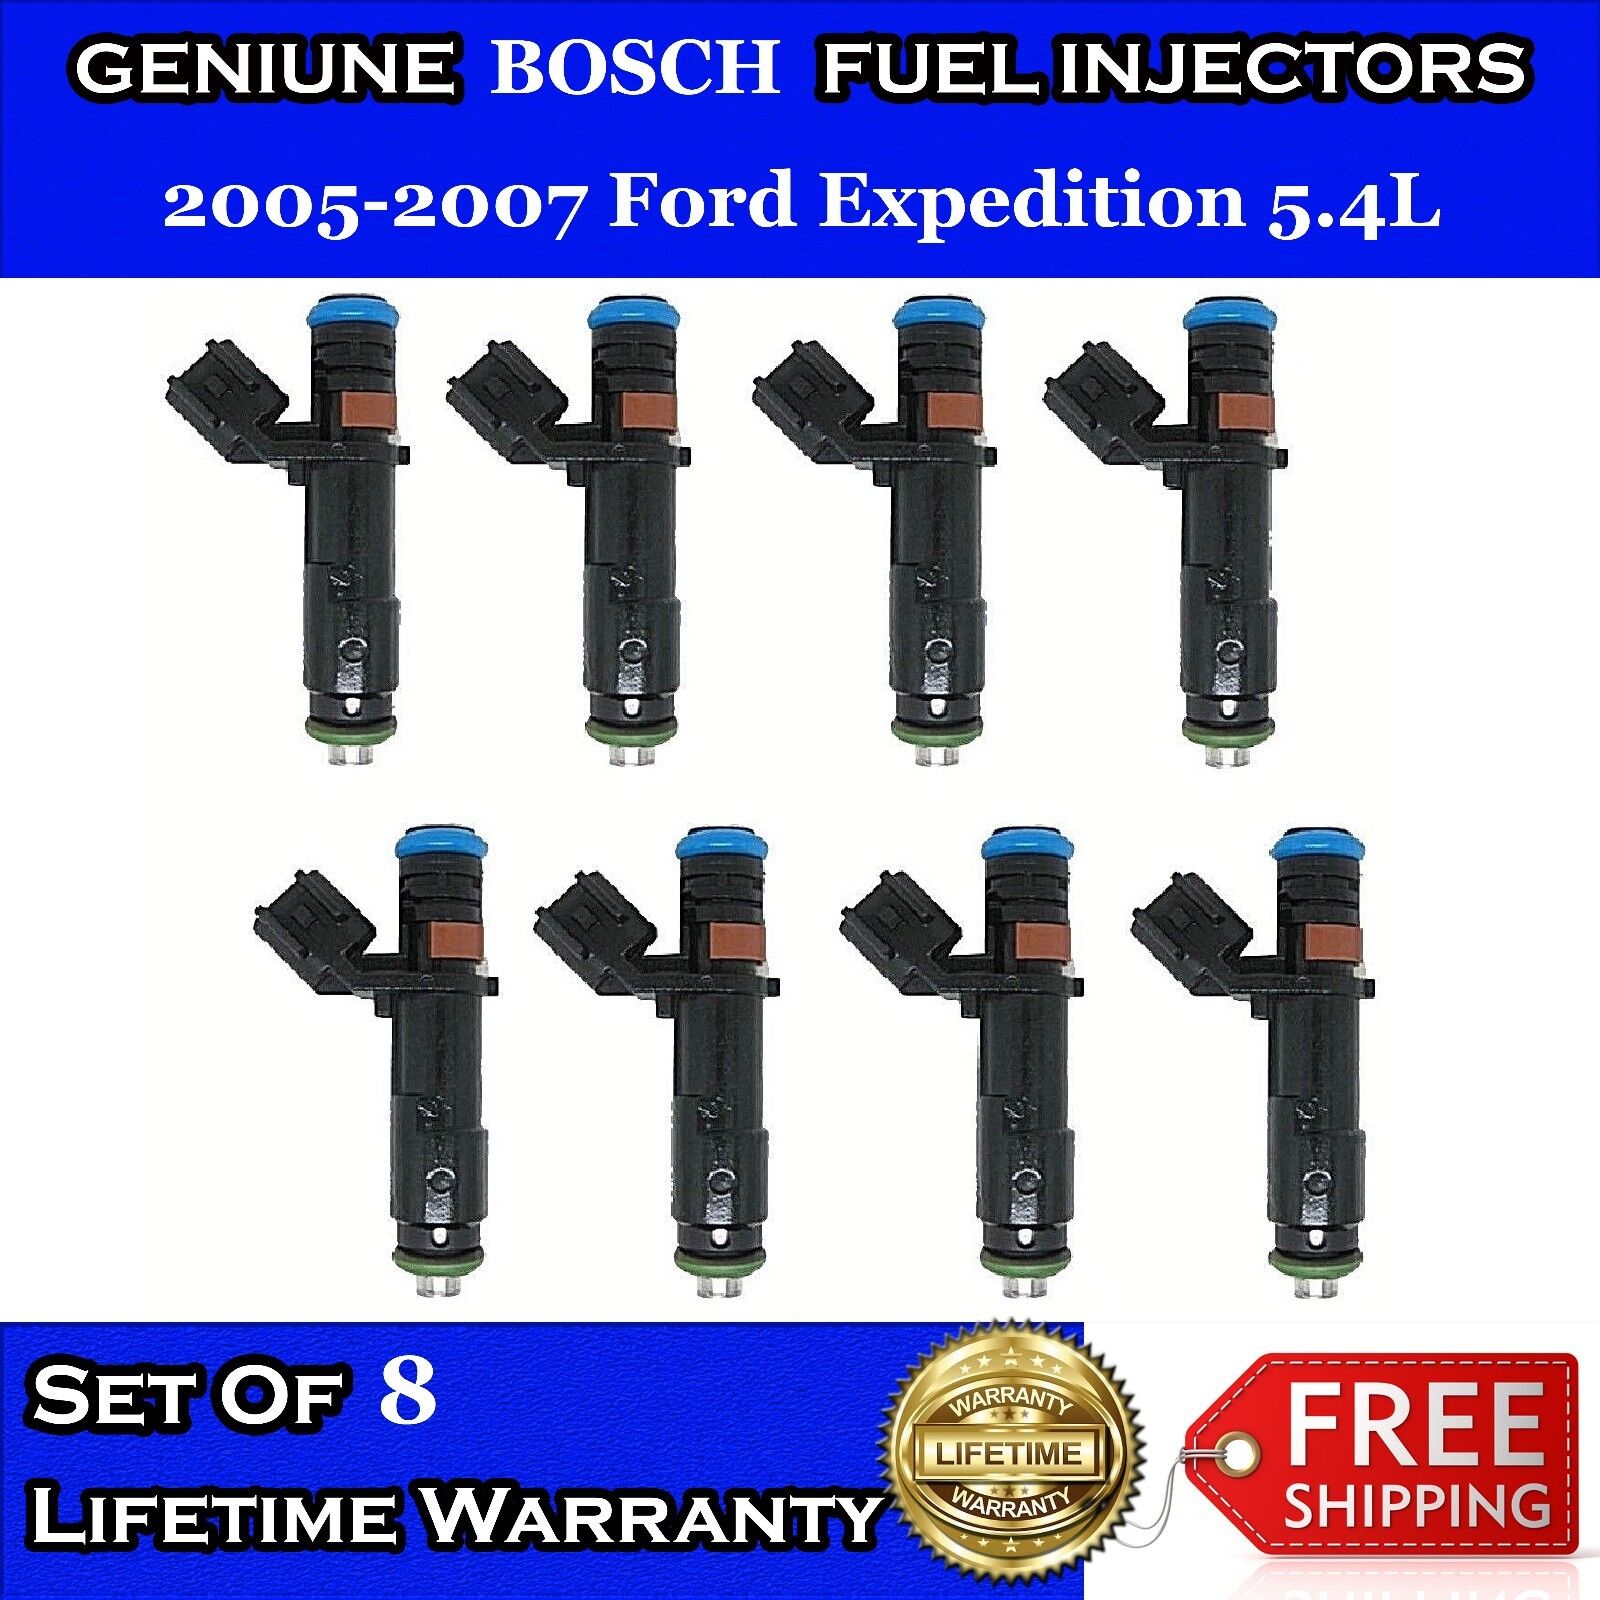 UPGRADED 4 HOLE OEM Bosch Fuel Injectors for 2005-2007 Ford Expedition 5.4L V8 